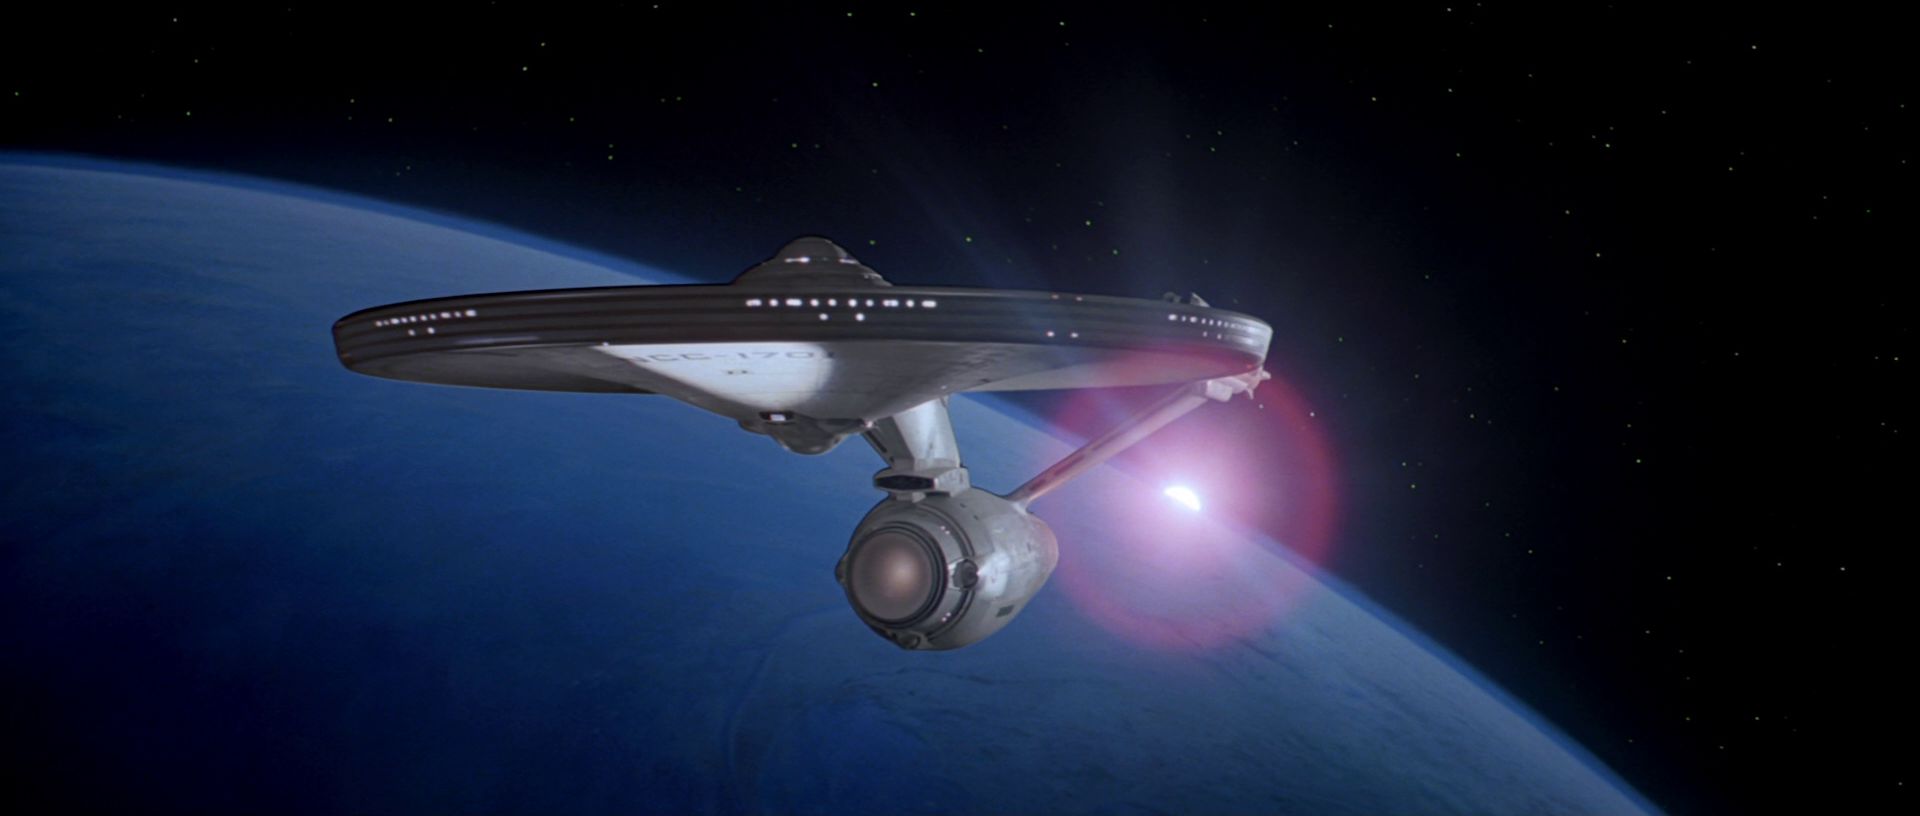 STAR TREK: THE MOTION PICTURE